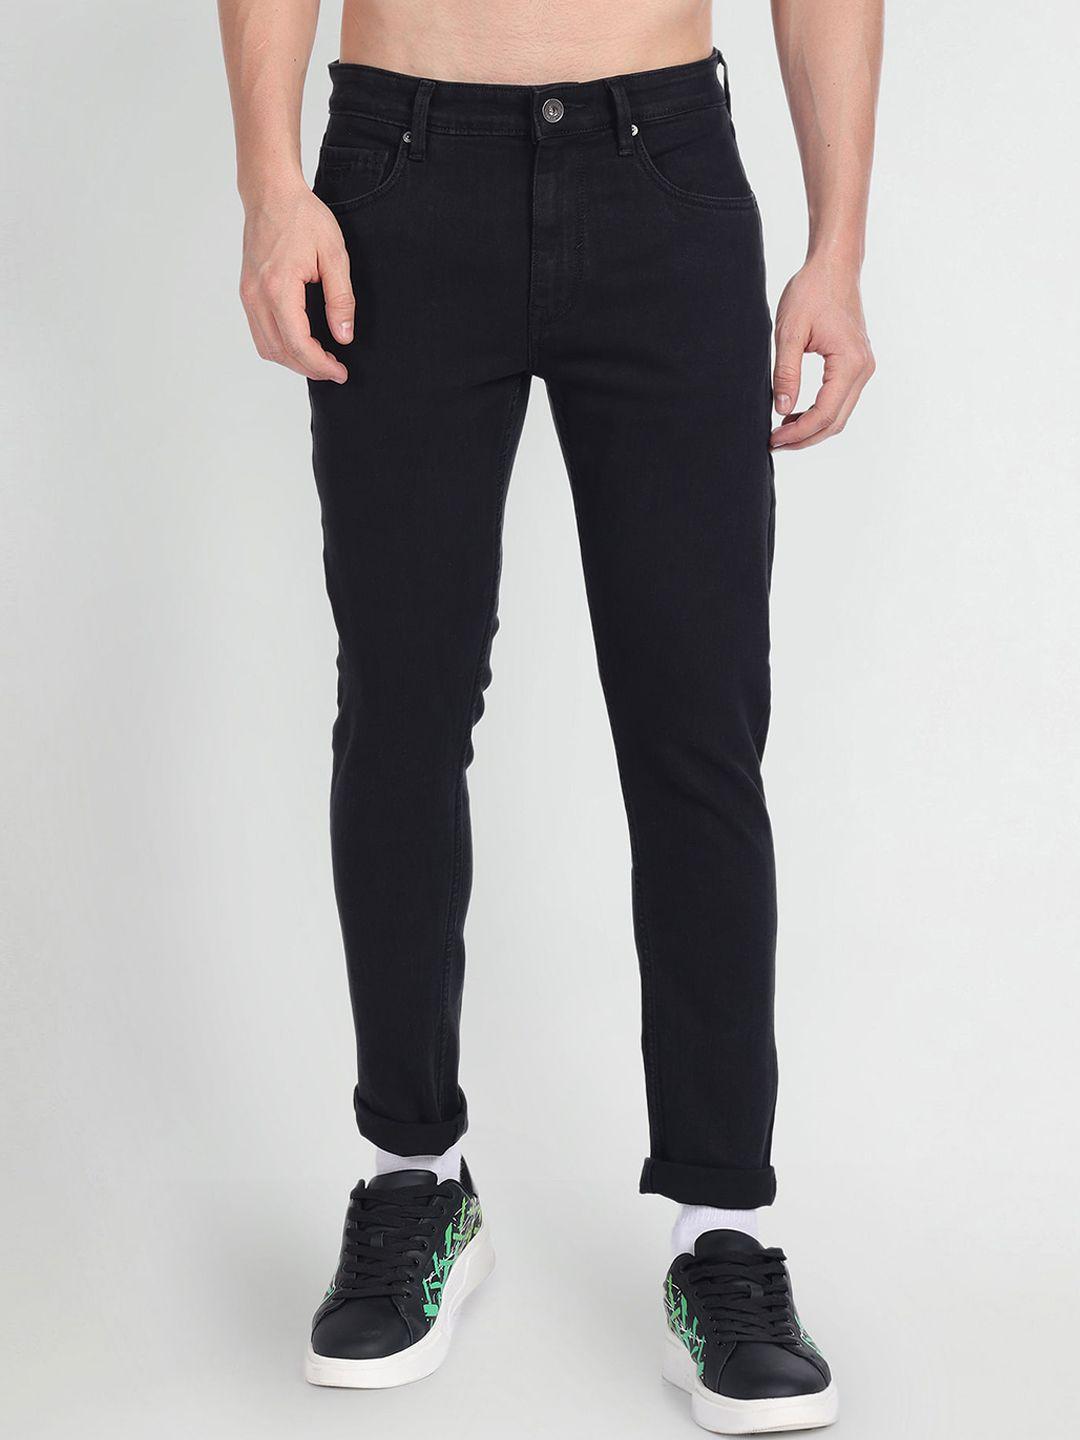 flying-machine-men-tapered-fit-mid-rise-stretchable-jeans